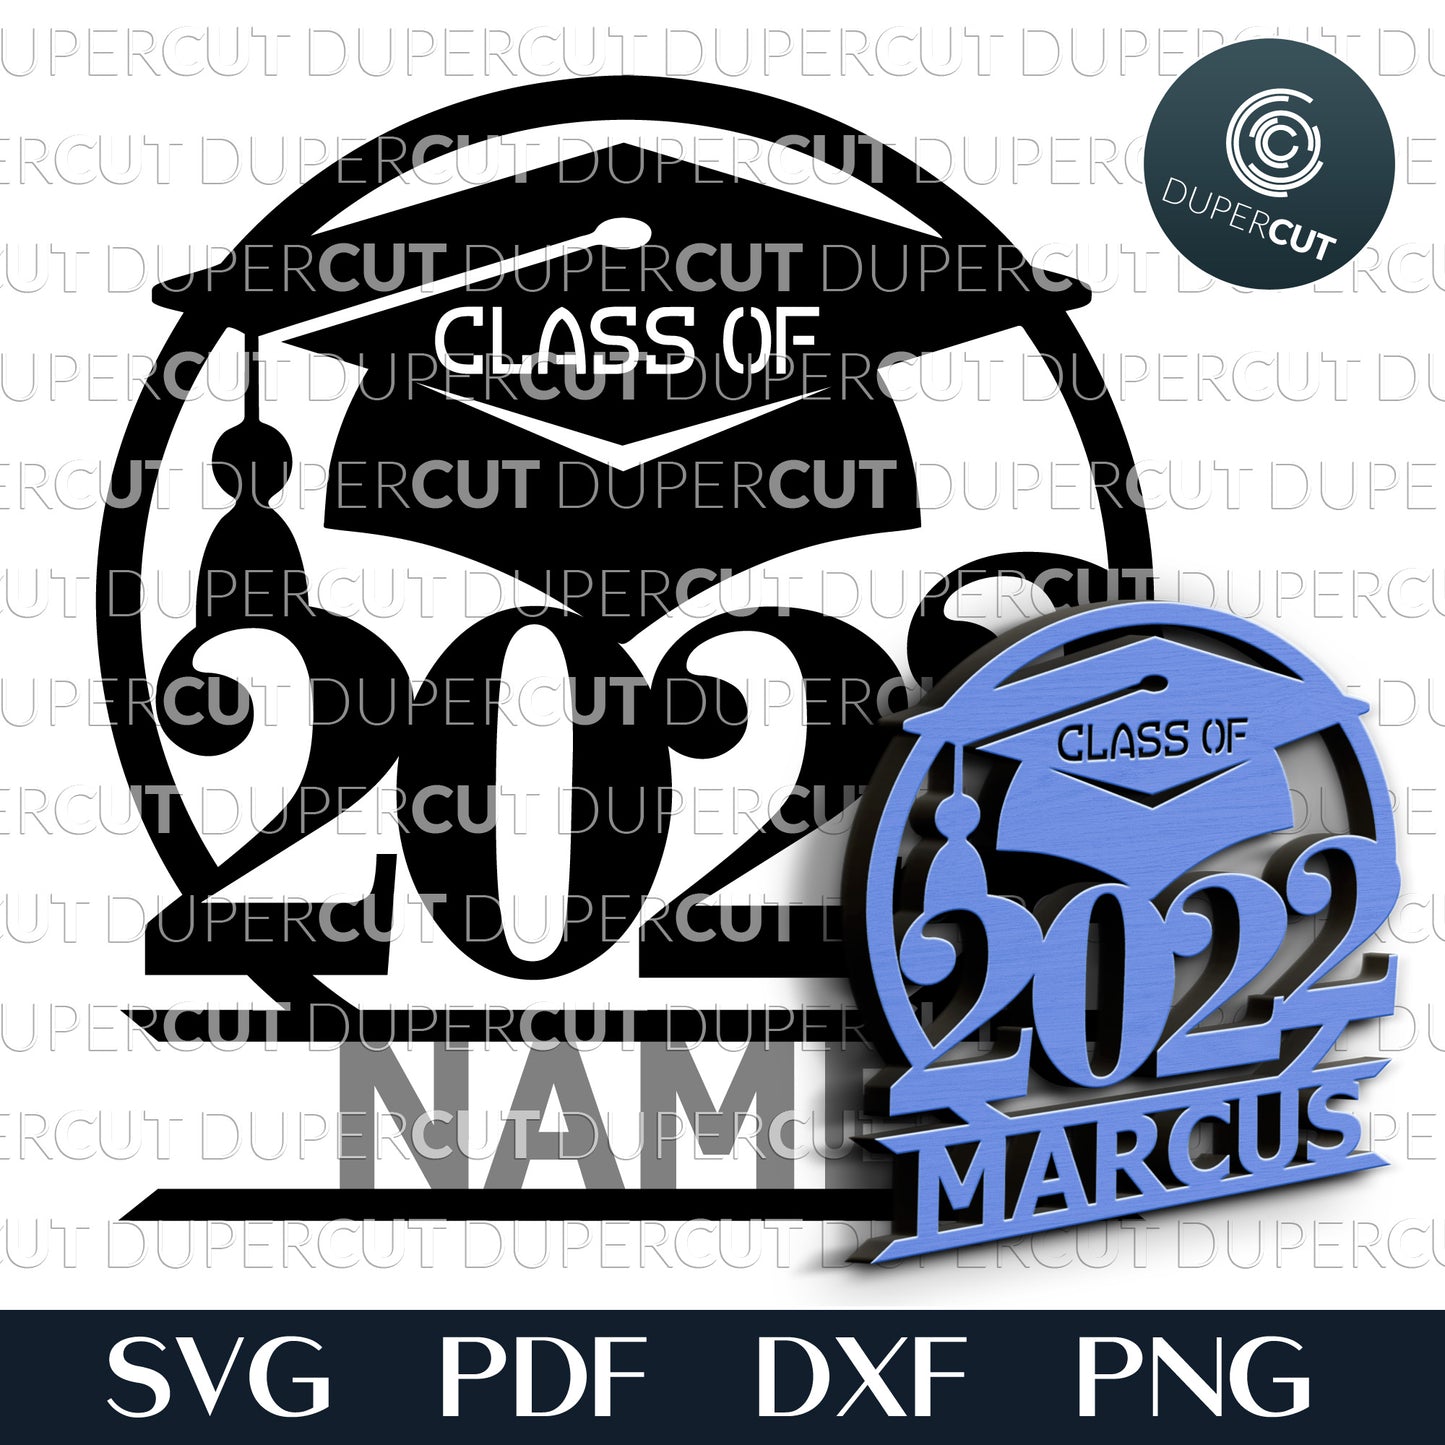 Grad 2022 - add custom name - SVG, EPS files for laser cutting with Glowforge, Cricut, Silhouette Cameo, CNC plasma machines by DuperCut